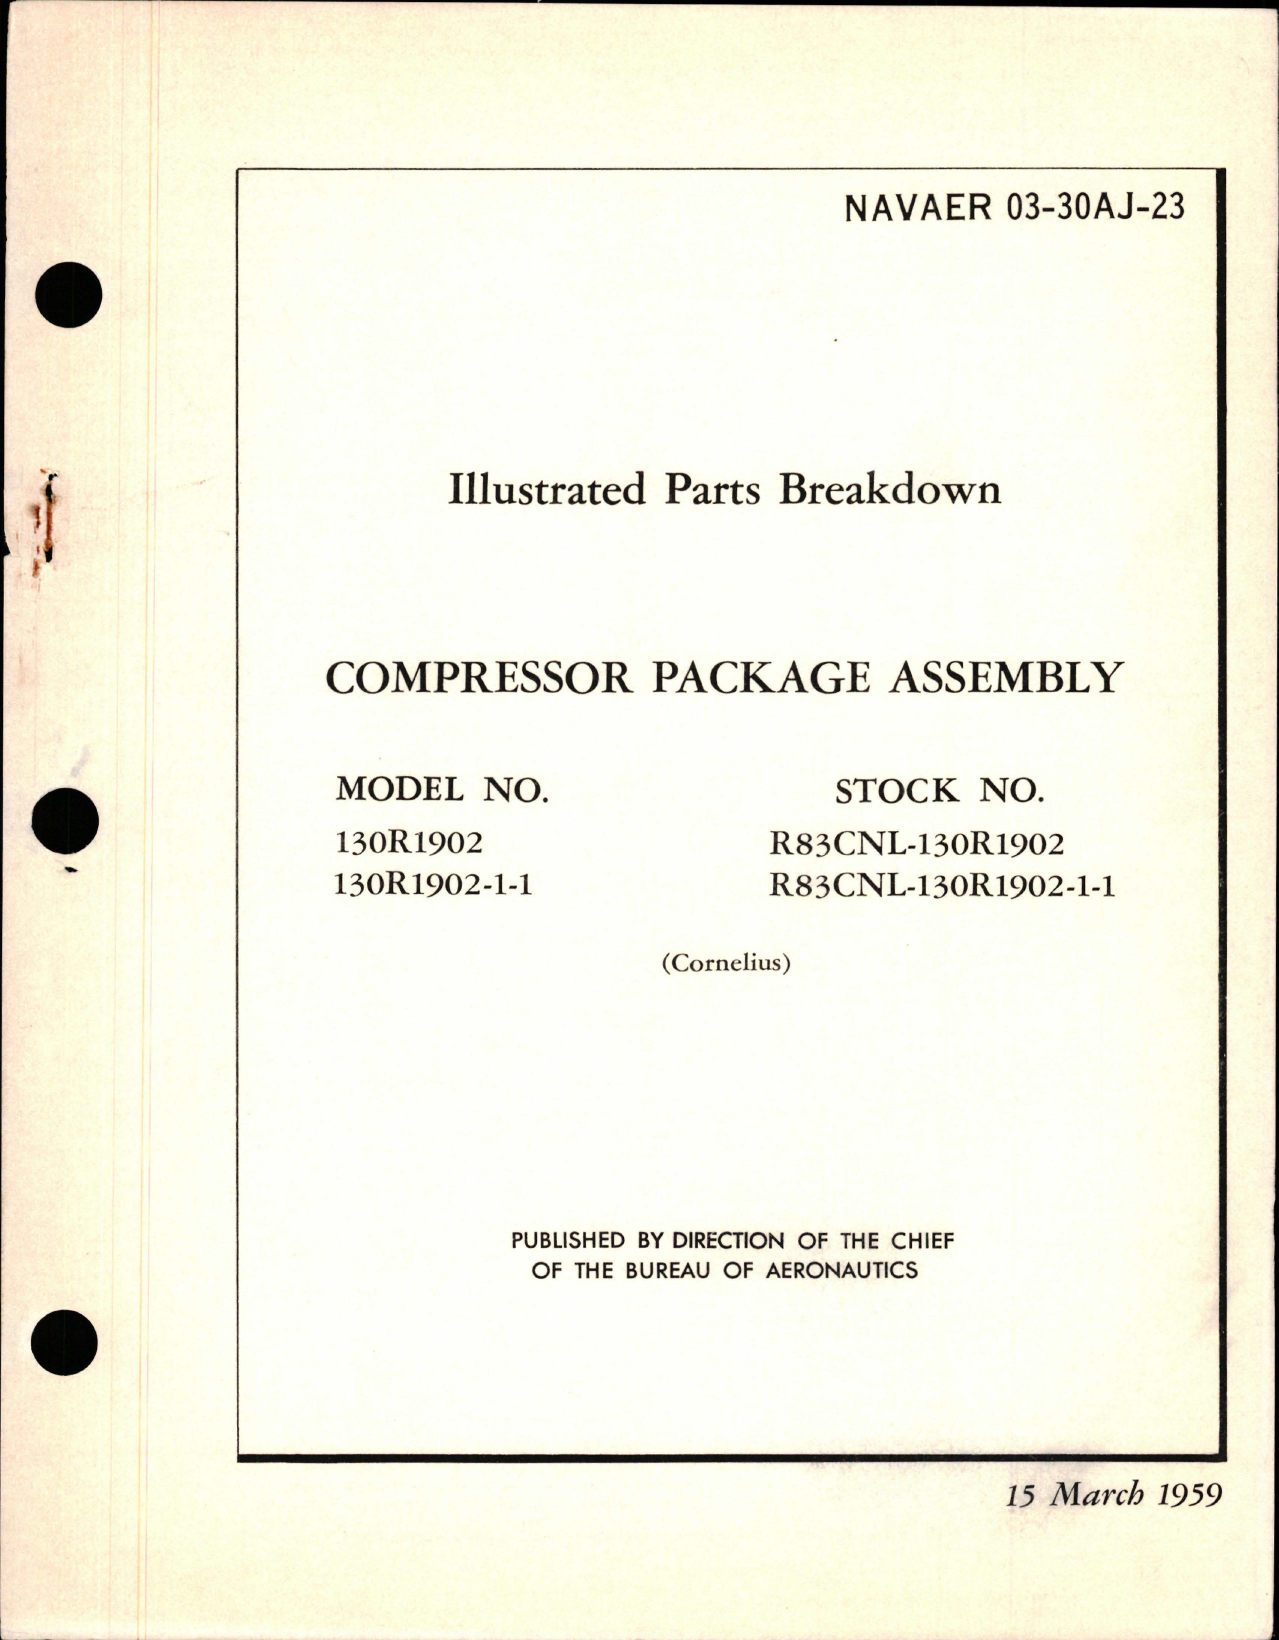 Sample page 1 from AirCorps Library document: Illustrated Parts Breakdown for Compressor Package Assembly - Models 130R1902 and 130R1902-1-1